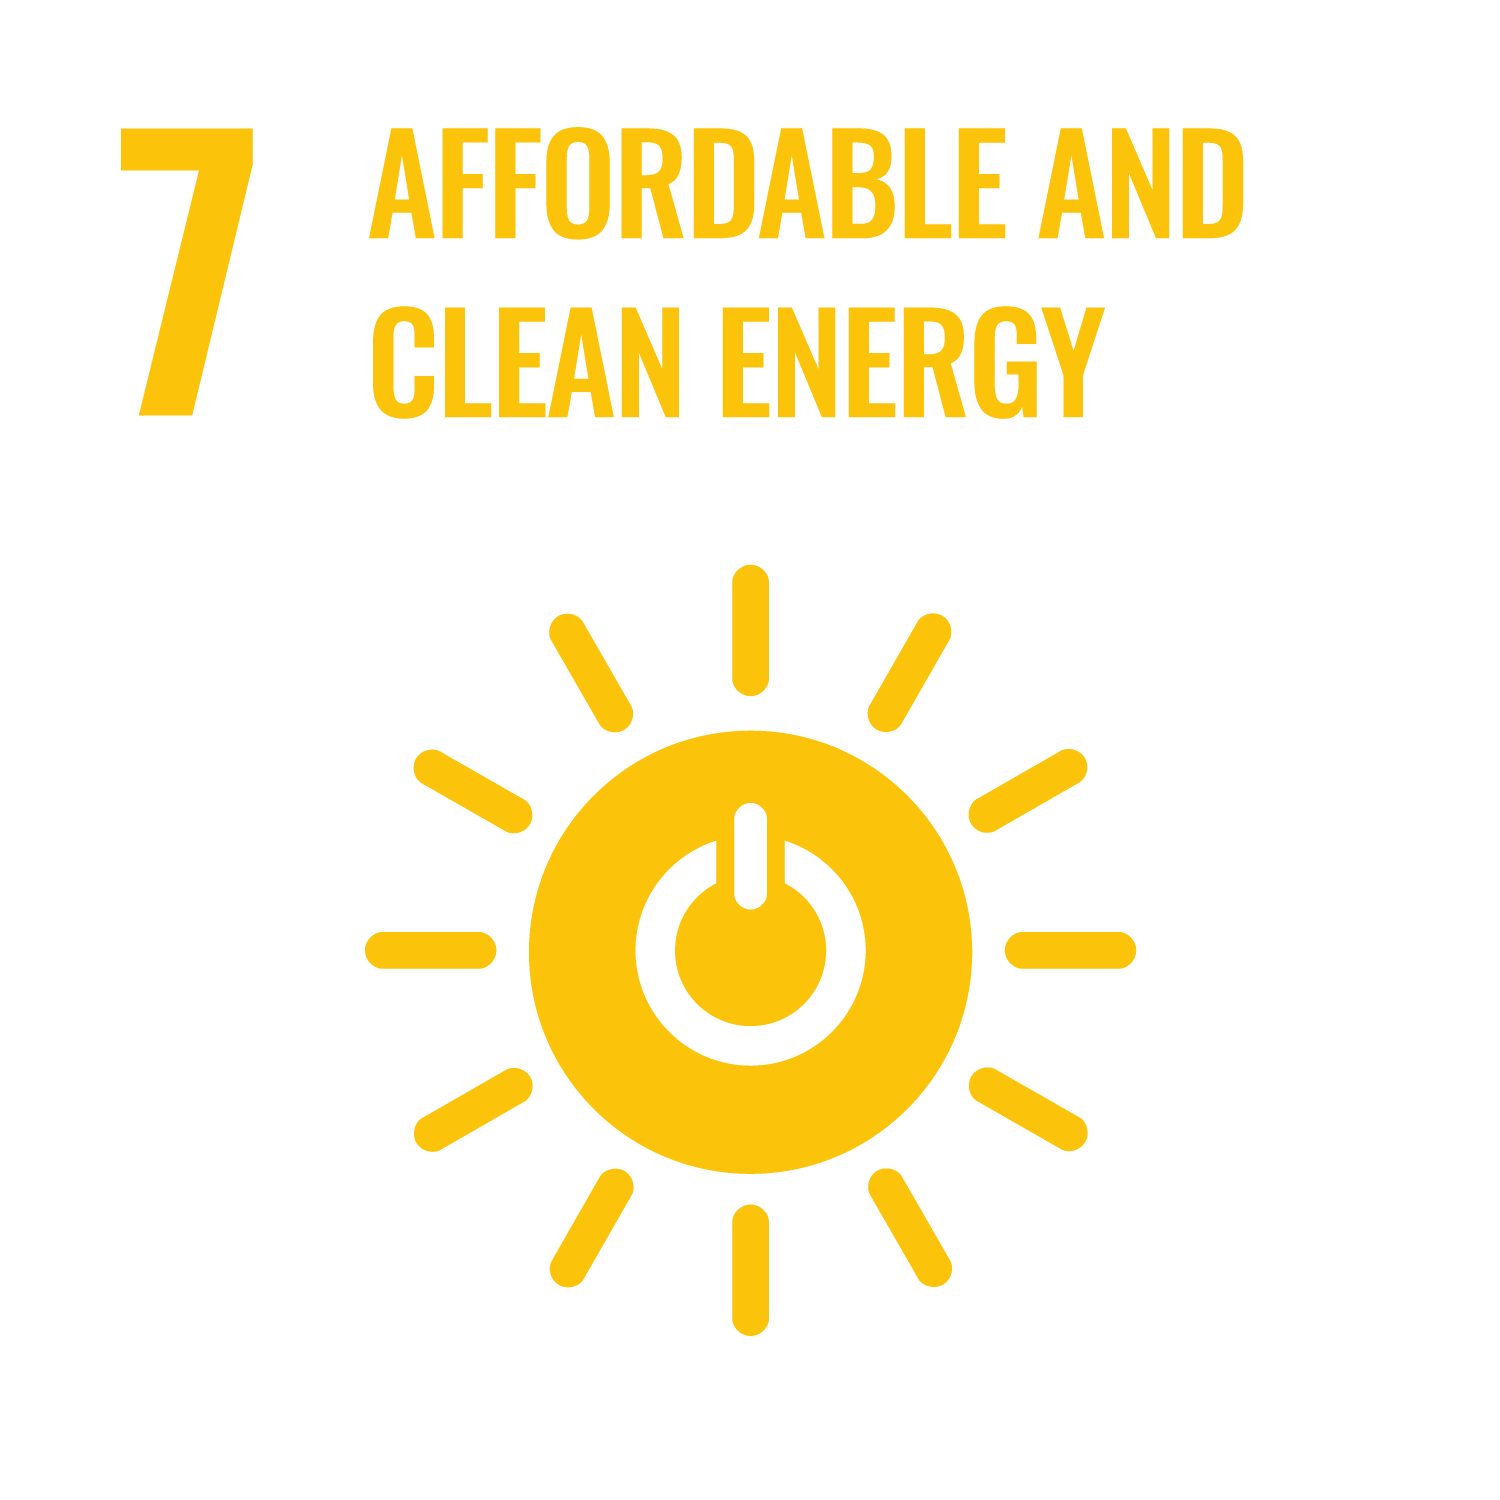 UN SDG 7: Affordable and clean energy